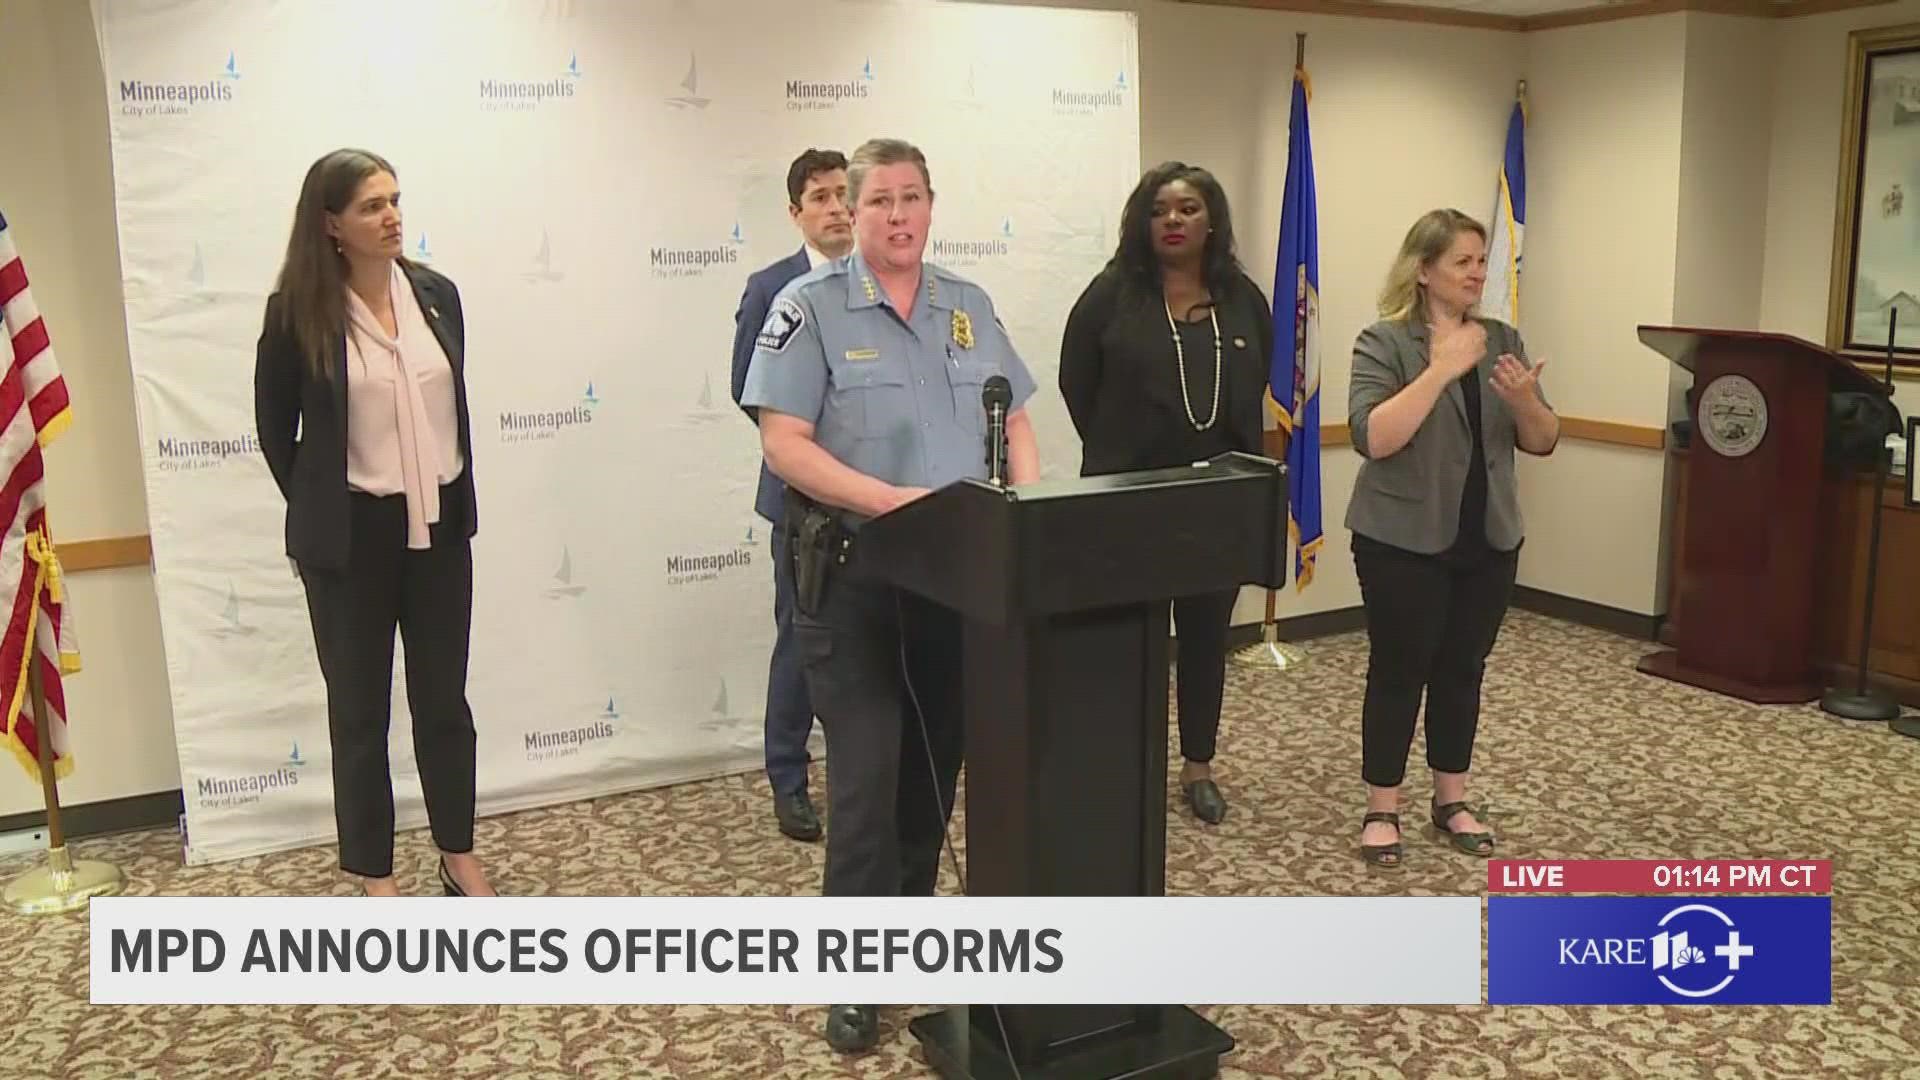 Minneapolis Mayor Jacob Frey and interim Police Chief Amelia Huffman are sharing details of new reforms in MPD involving officer discipline and well-being.